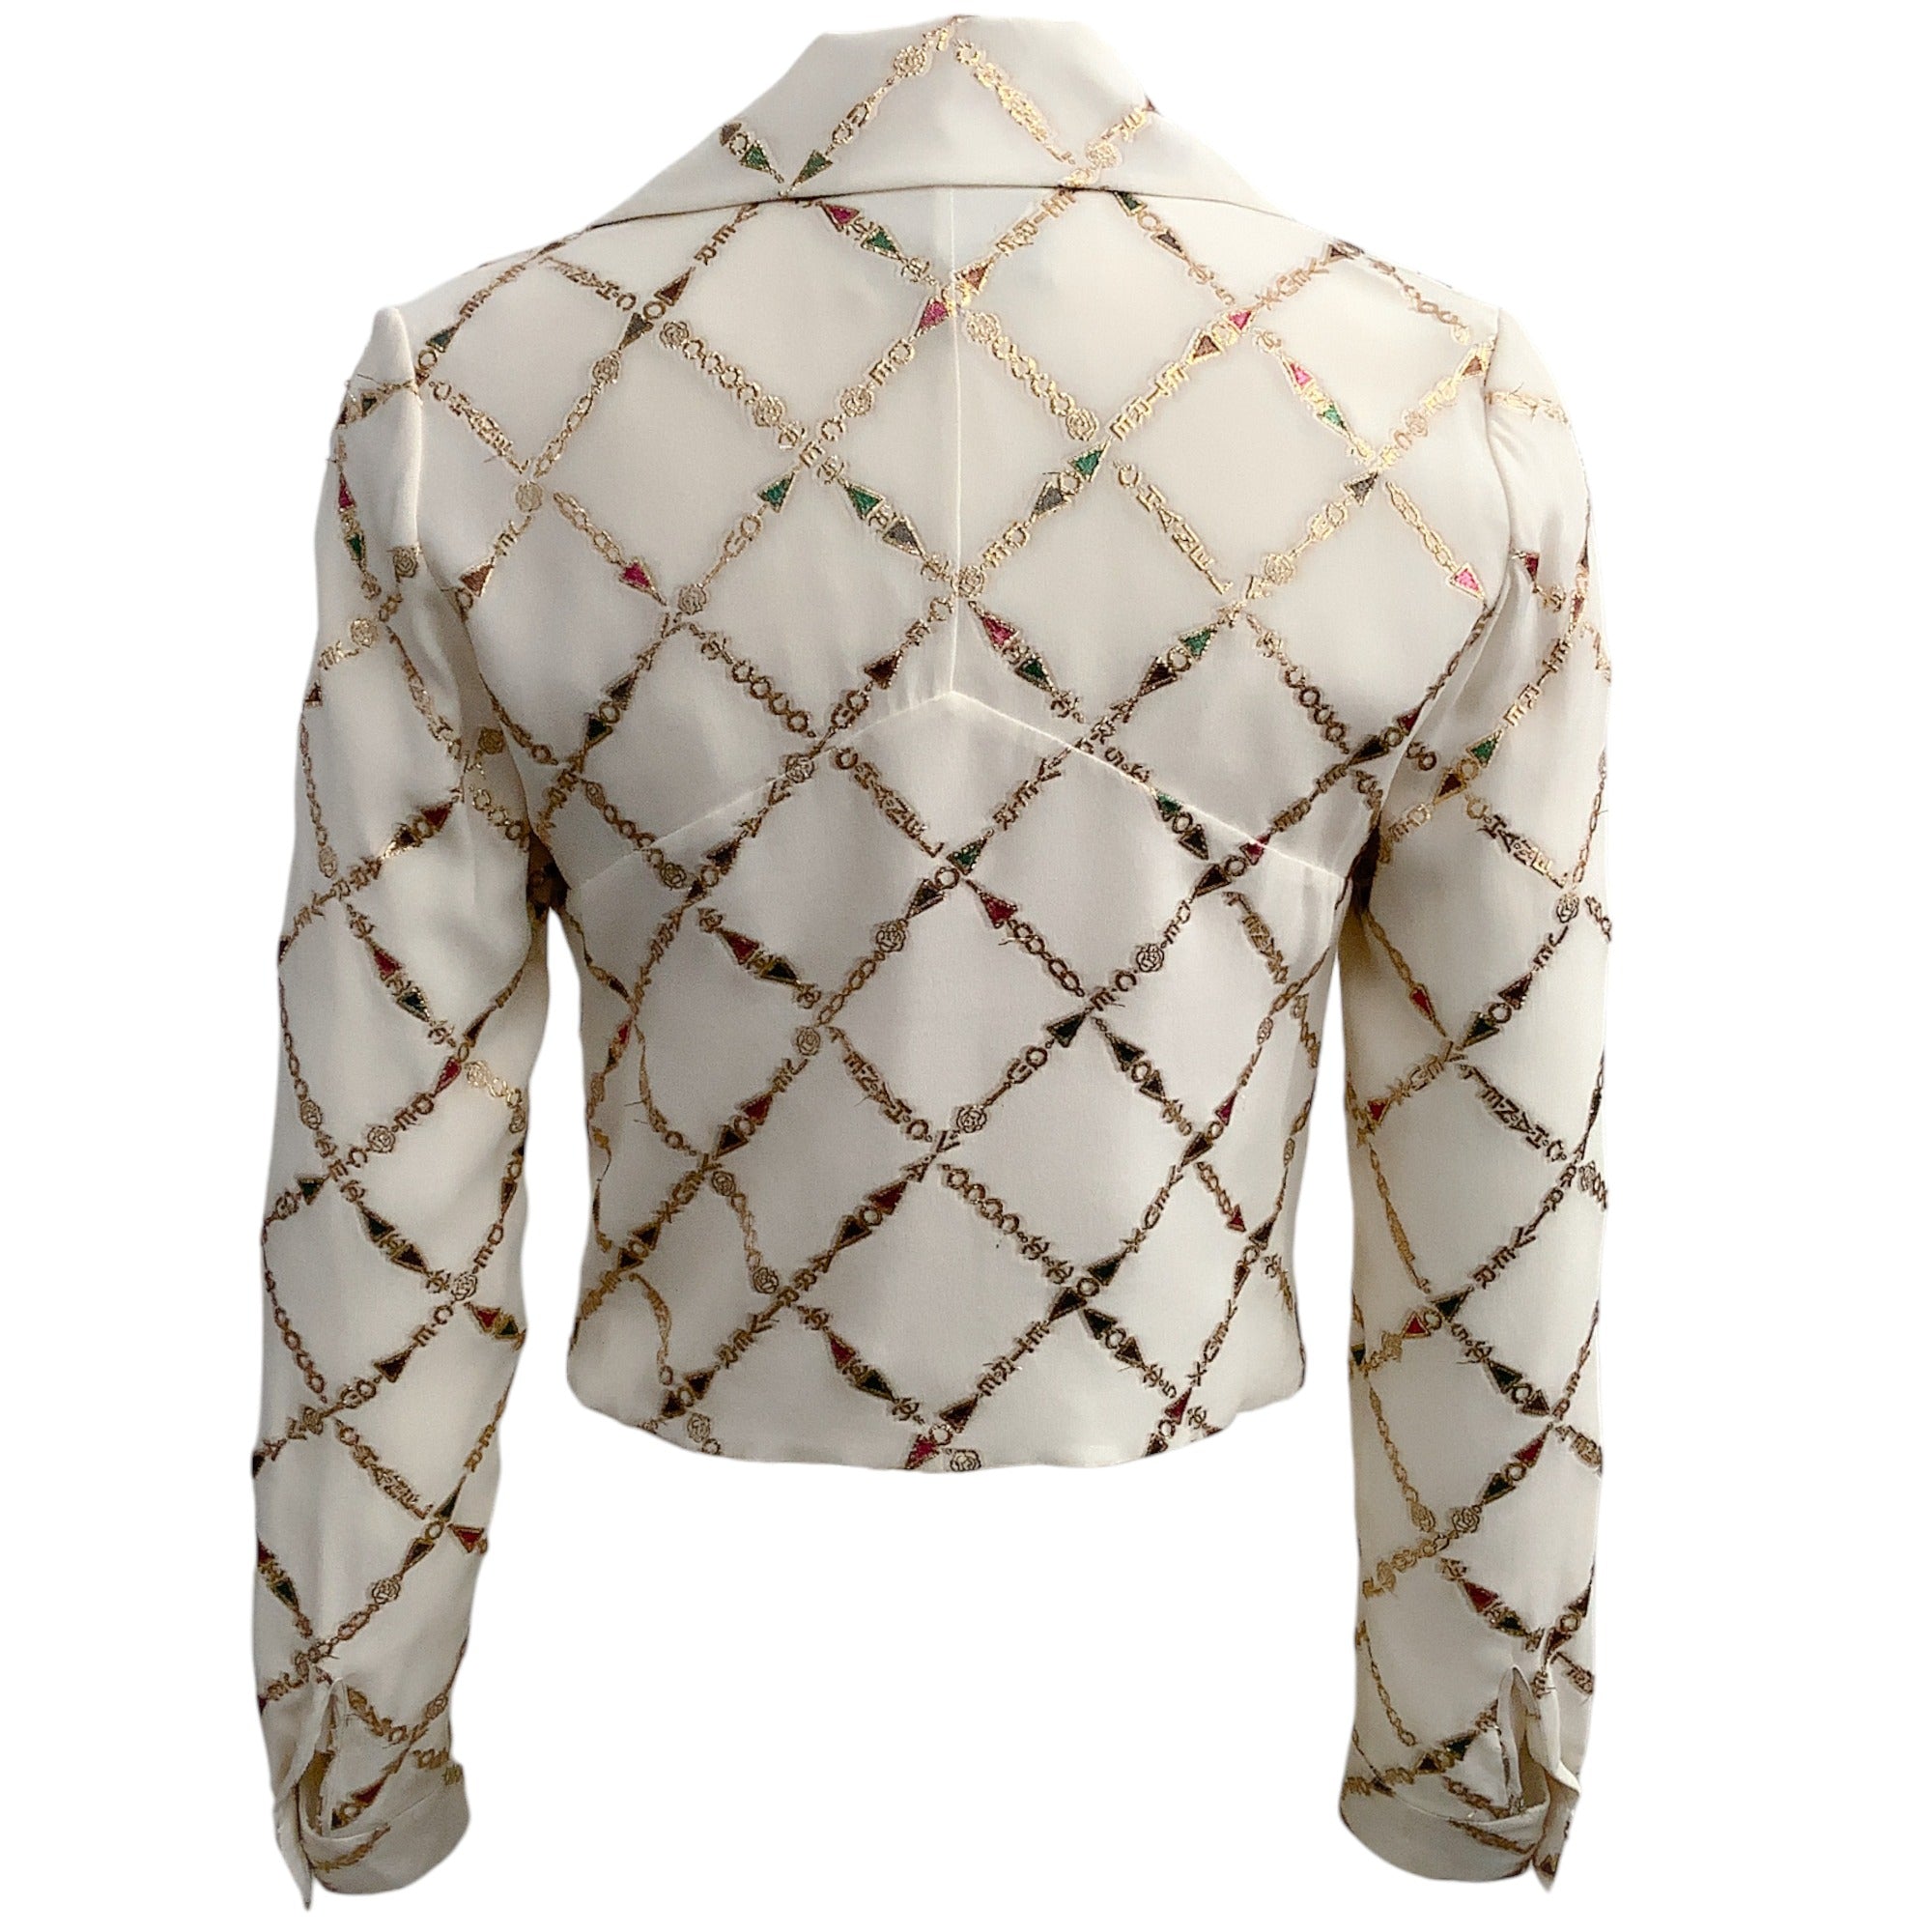 Chanel Ivory Low Cut Blouse with Gold Lurex Embroidery